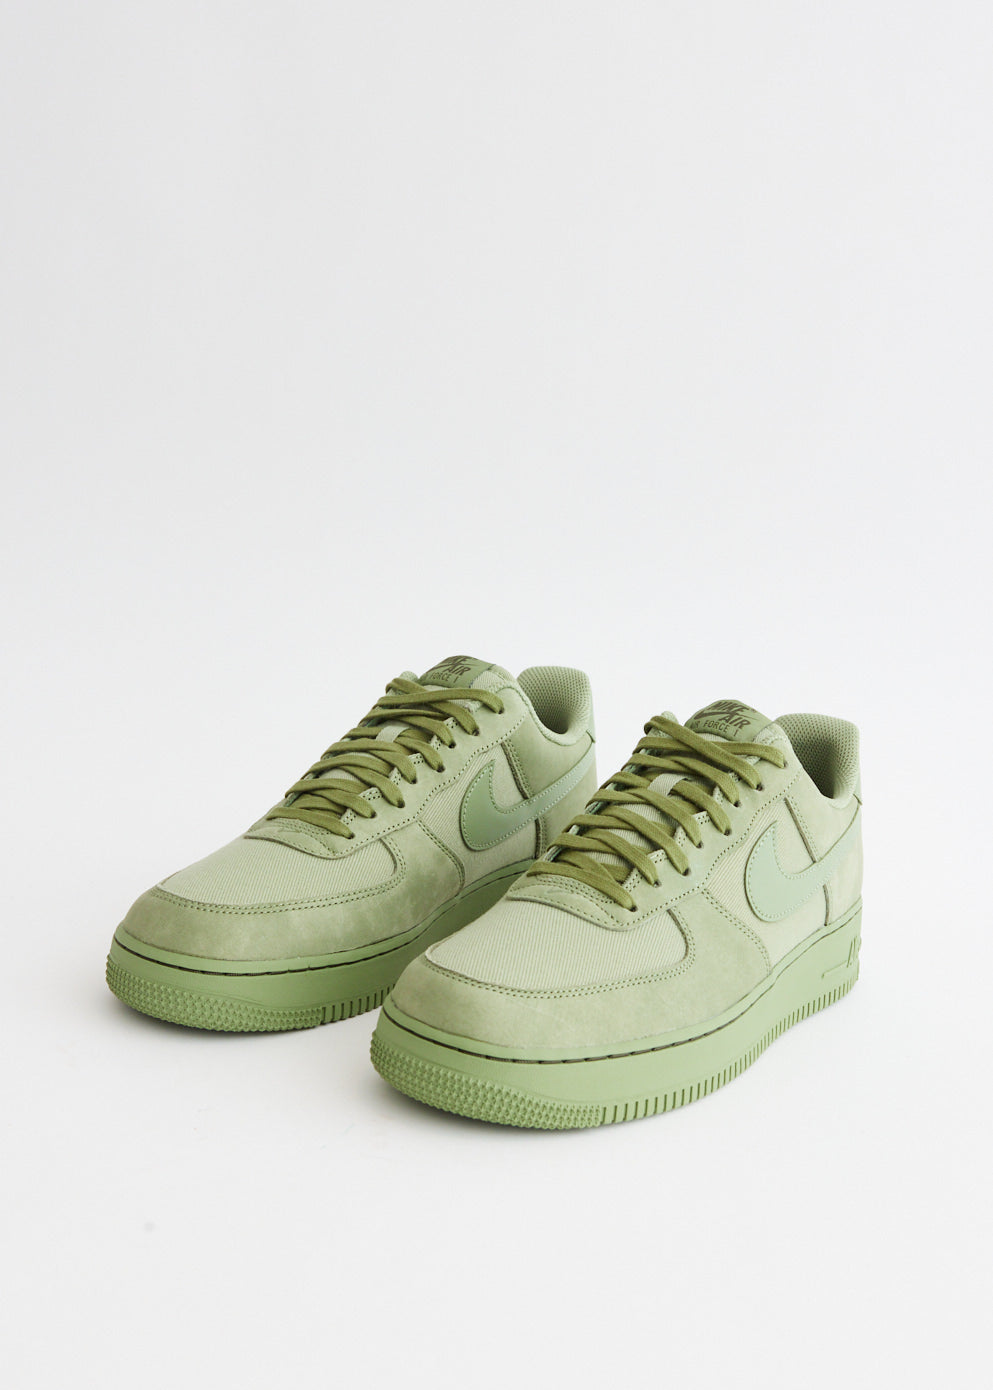 Air Force 1 '07 LX Low 'Oil Green' Sneakers